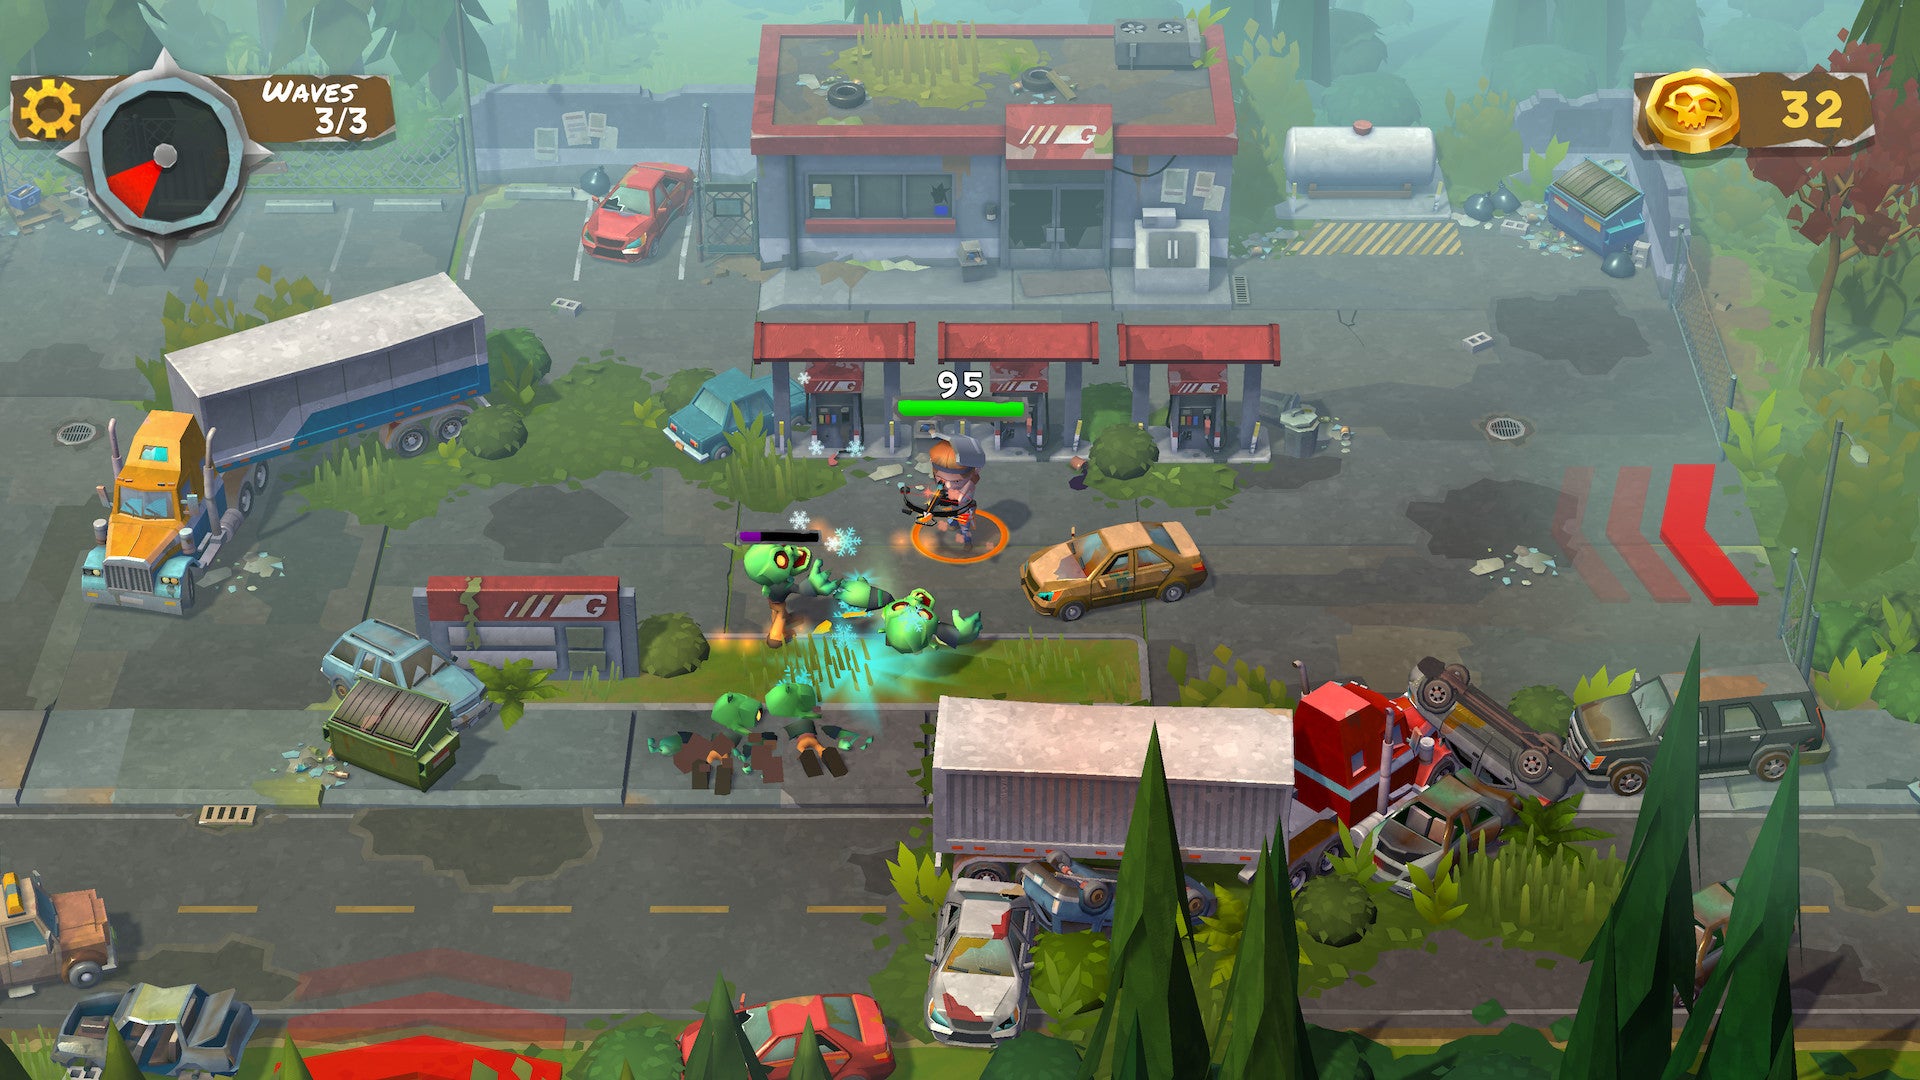 The player takes on zombies at a gas station in Survival Z